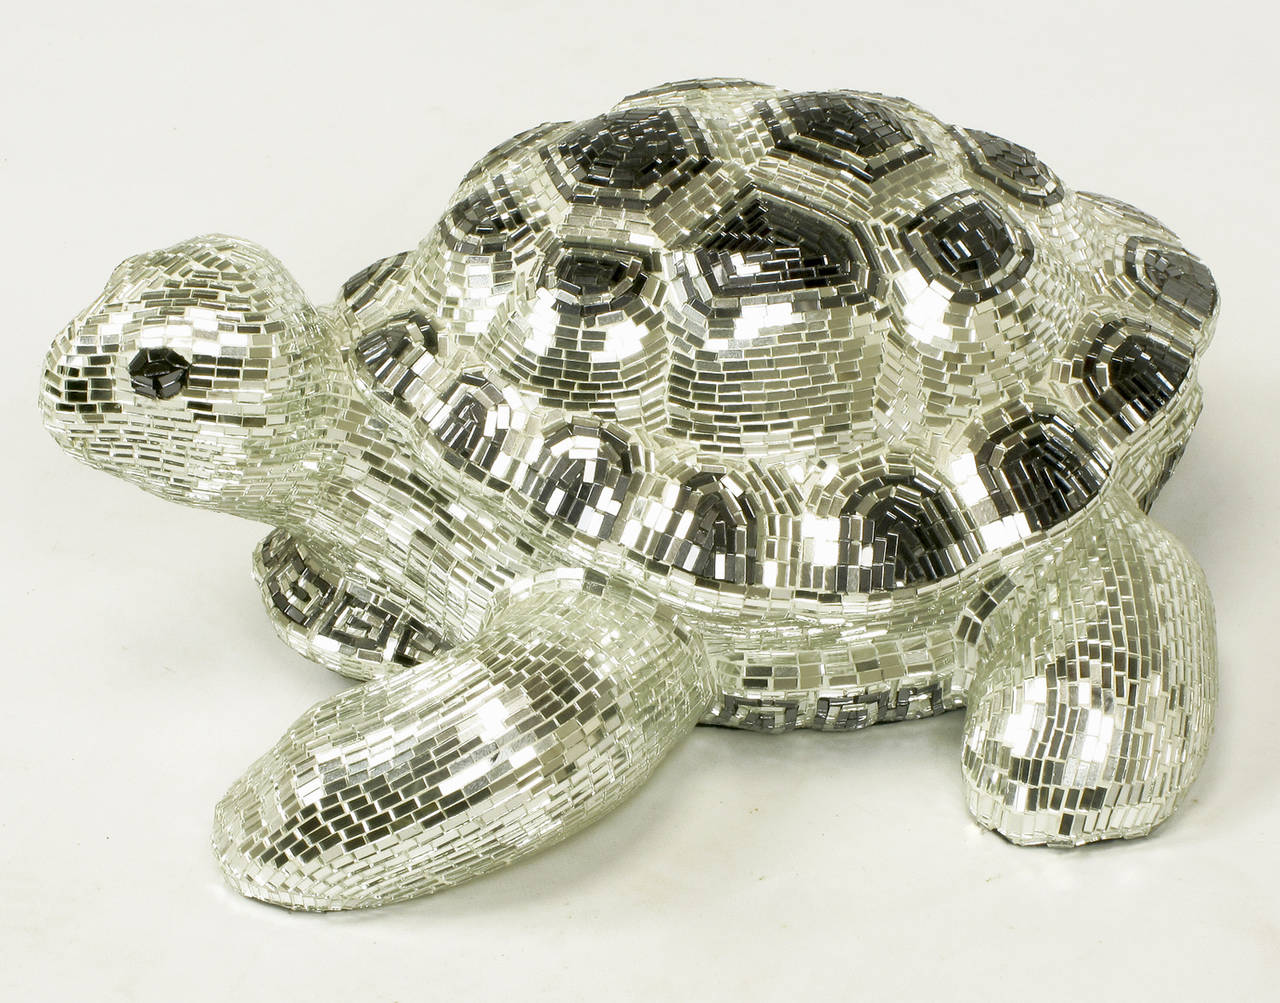 American Lifesize Tortoise Sculpture Clad in Tessellated Mirror